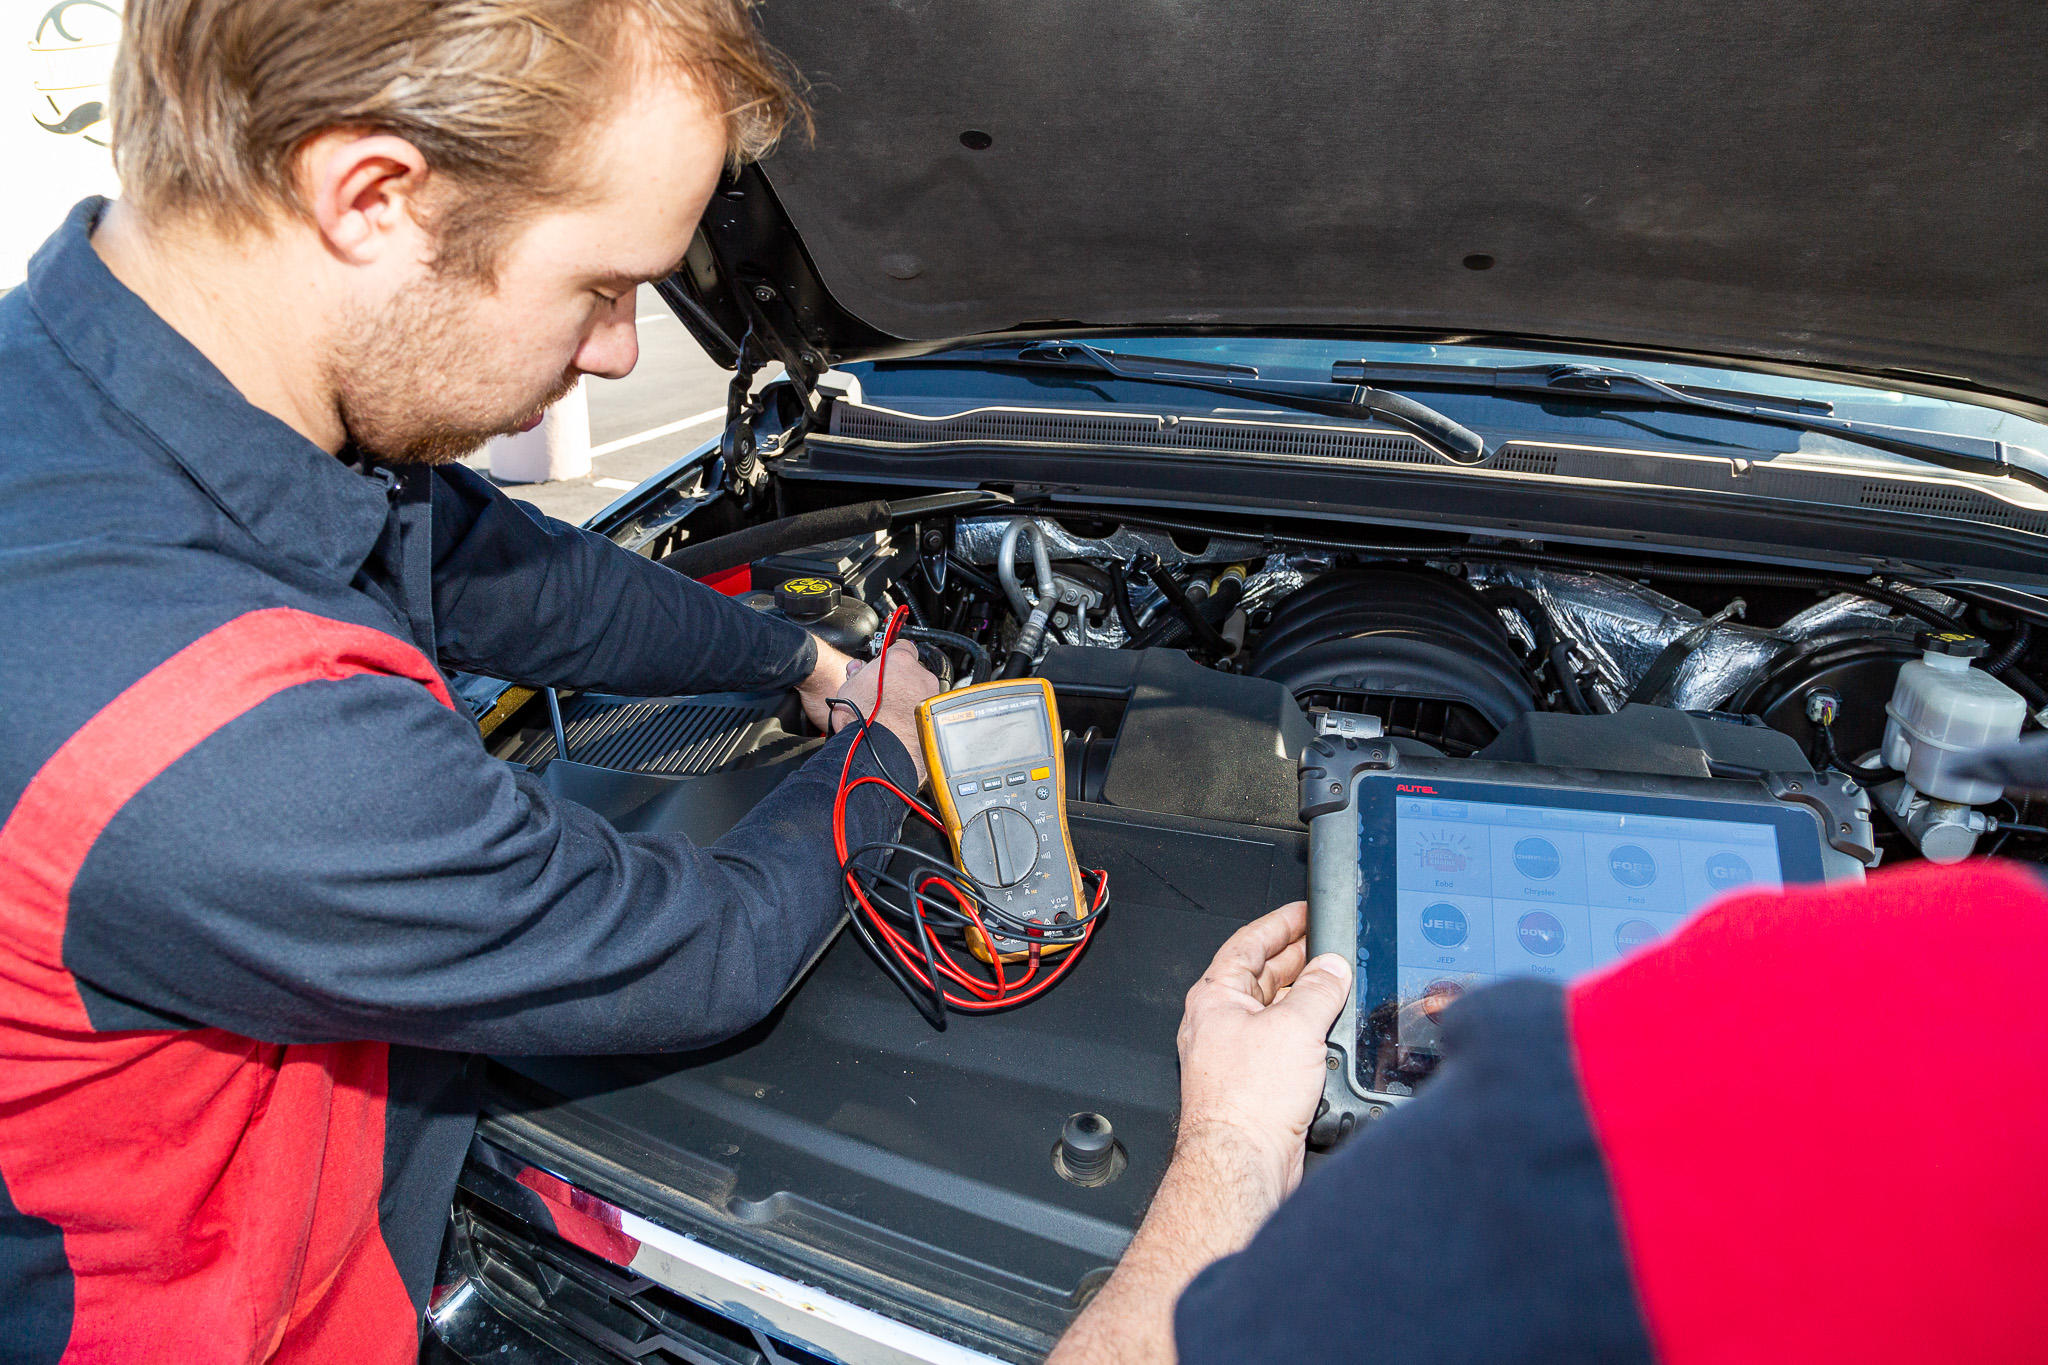 Free Inspections - auto inspections in Mesa, Gilbert and nearby areas